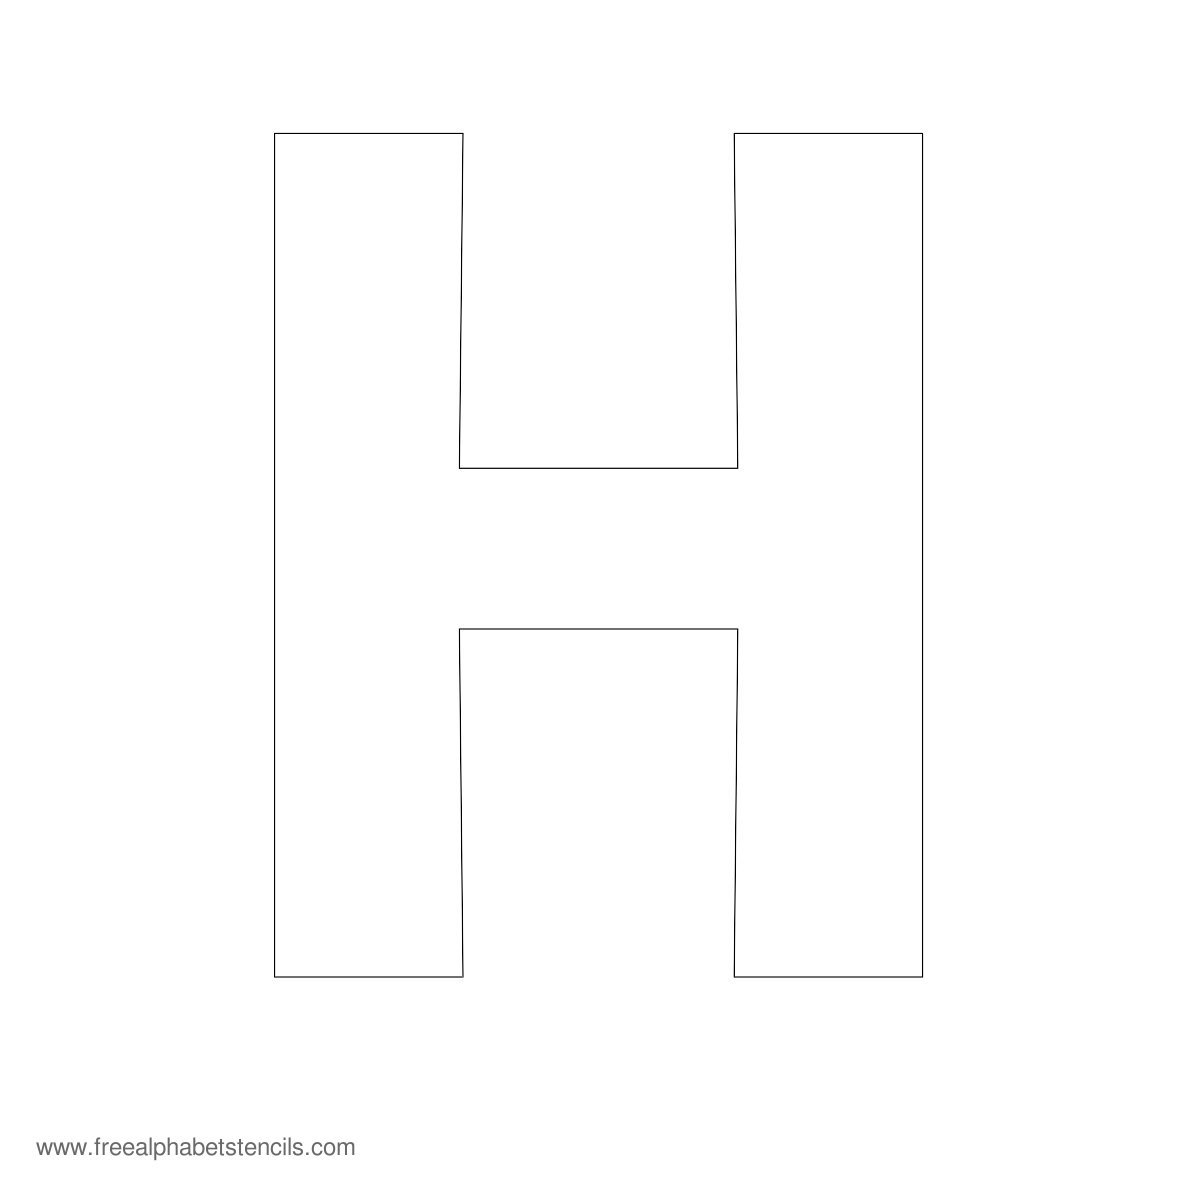 4 Best Images of Large Printable Alphabet Letter H Free Printable